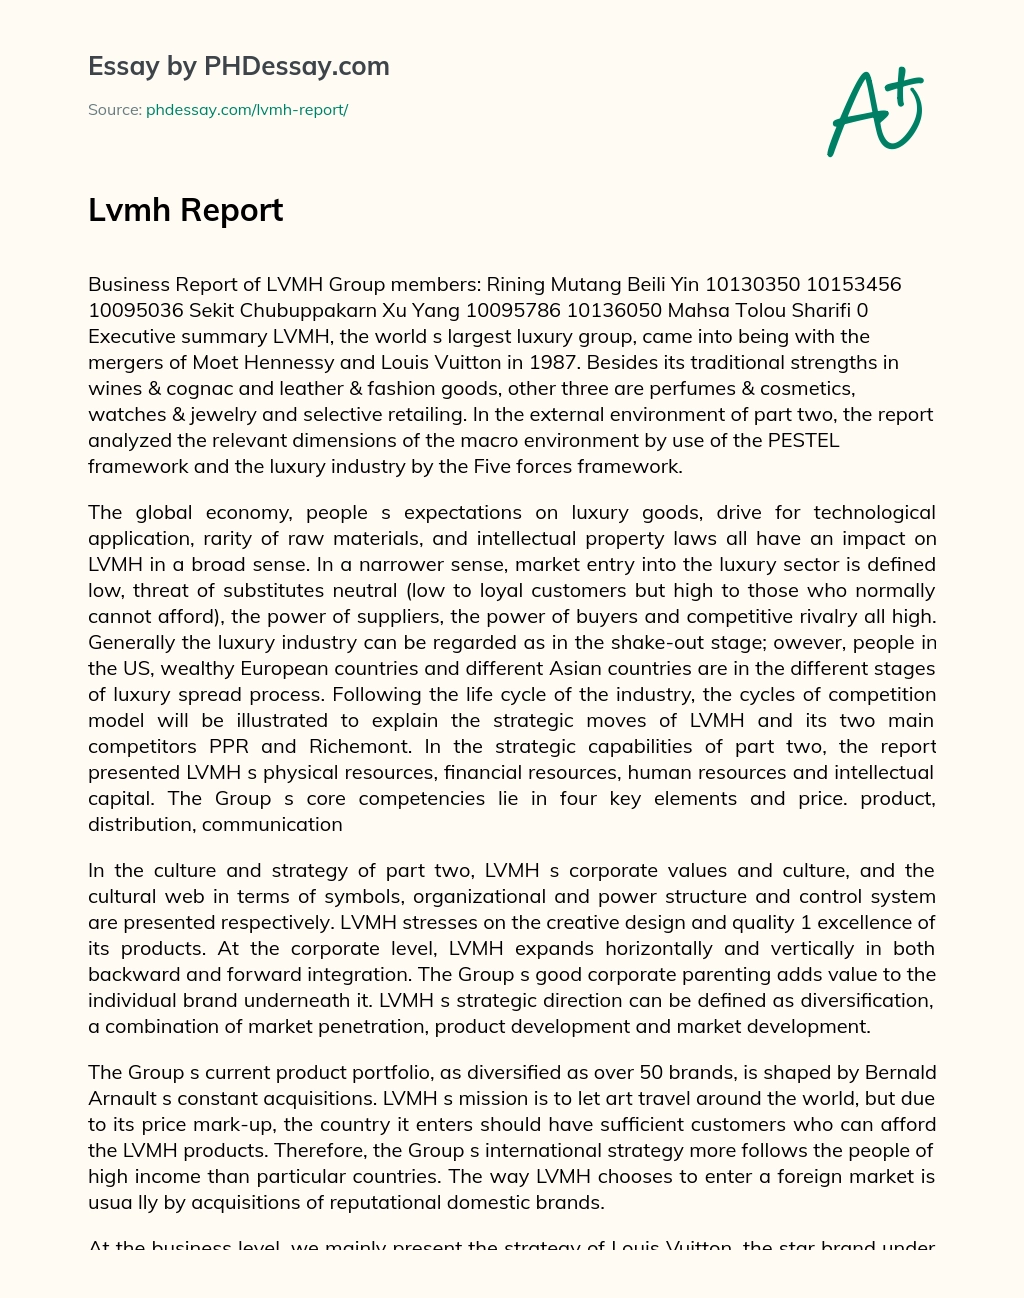 Business Report on LVMH Group: Analysis of External Environment and Luxury Industry essay